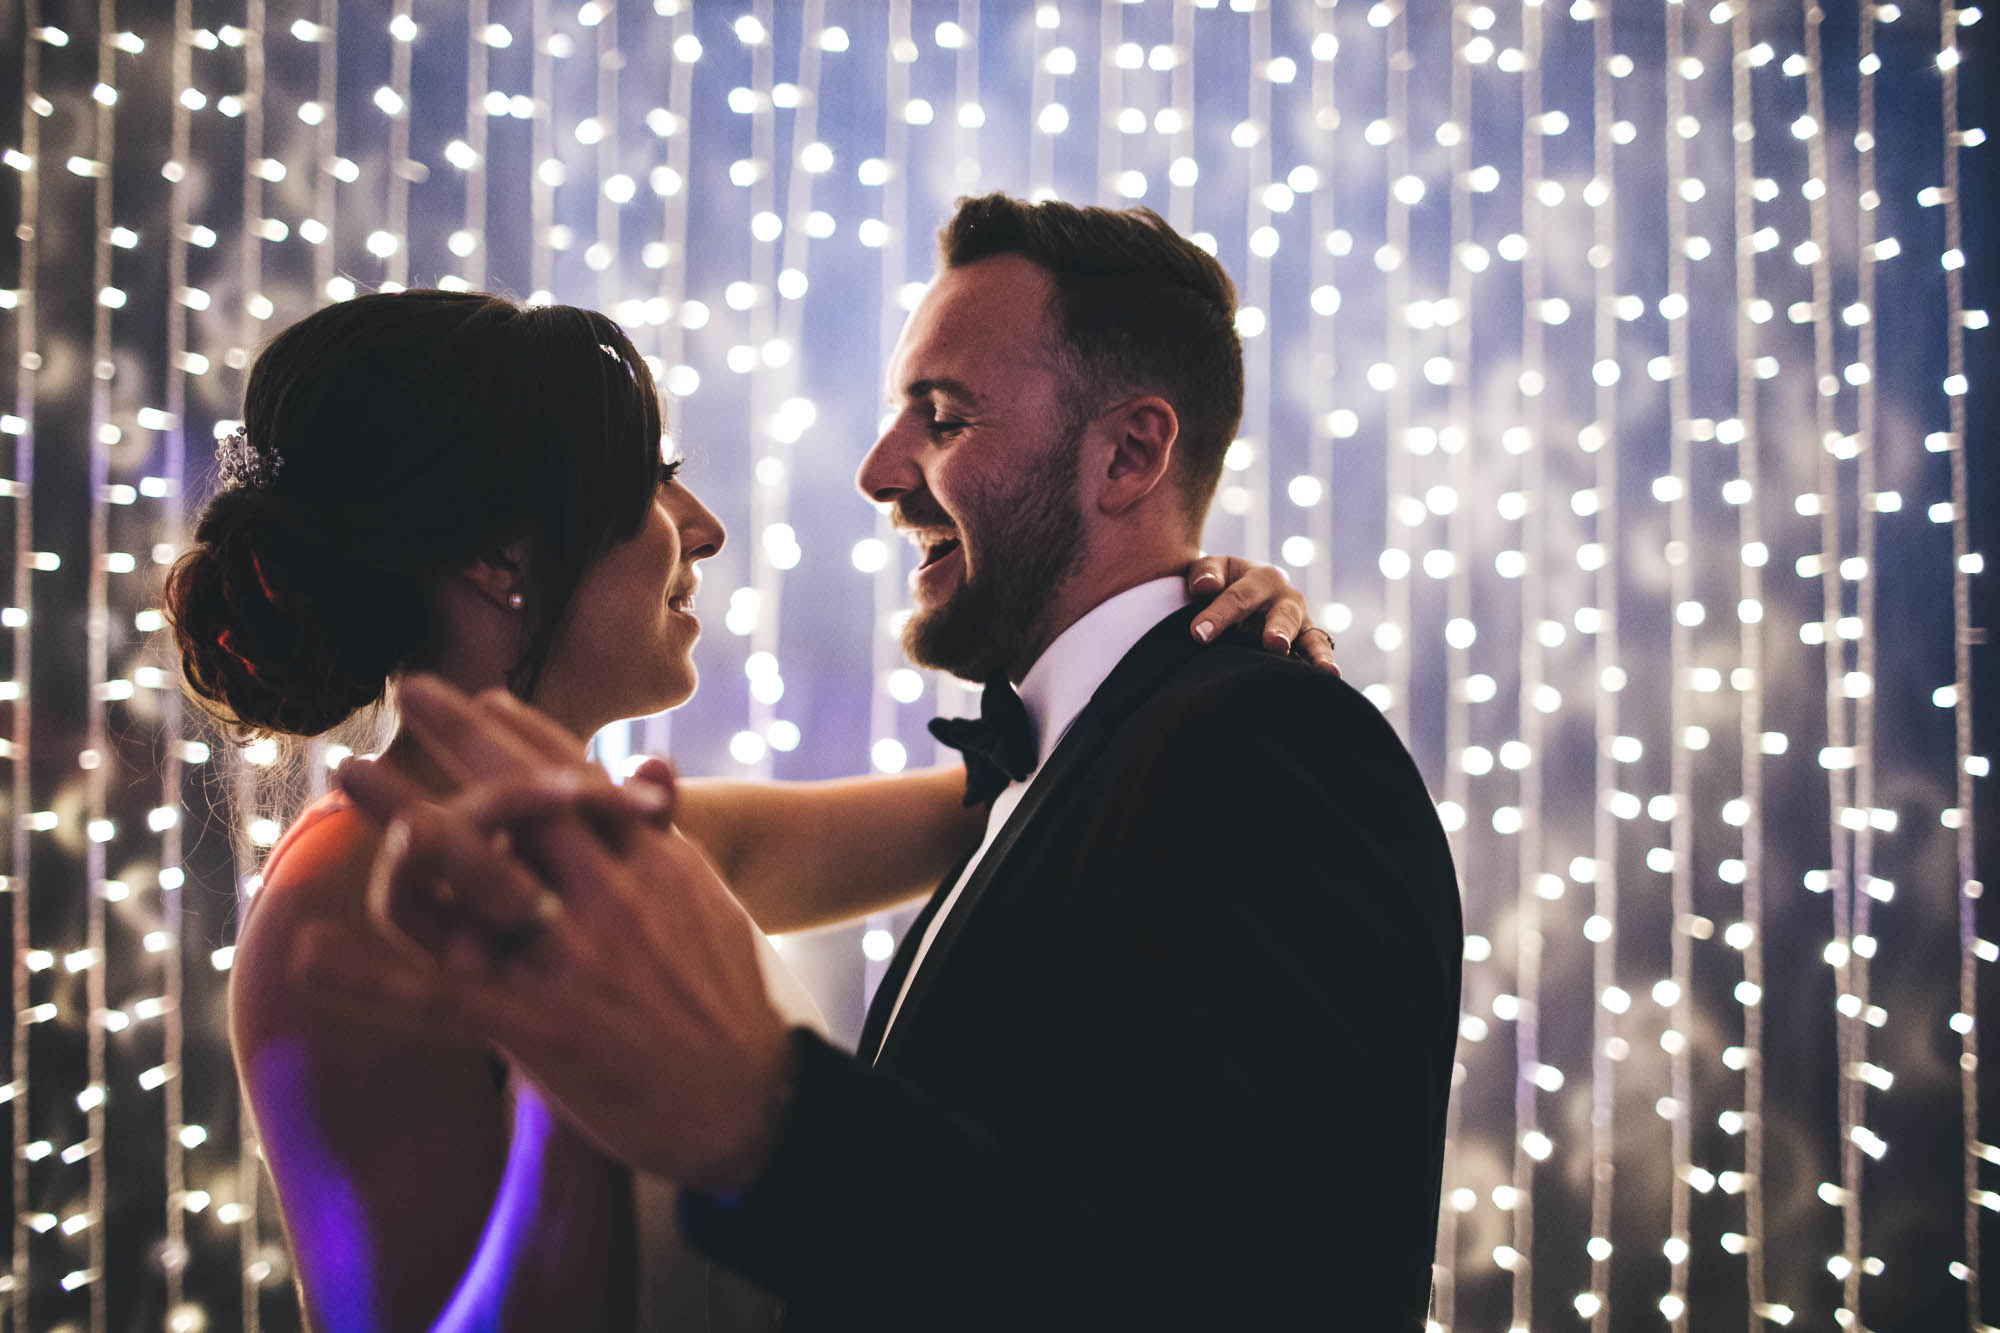 Married couple share first dance in front of fairy lights